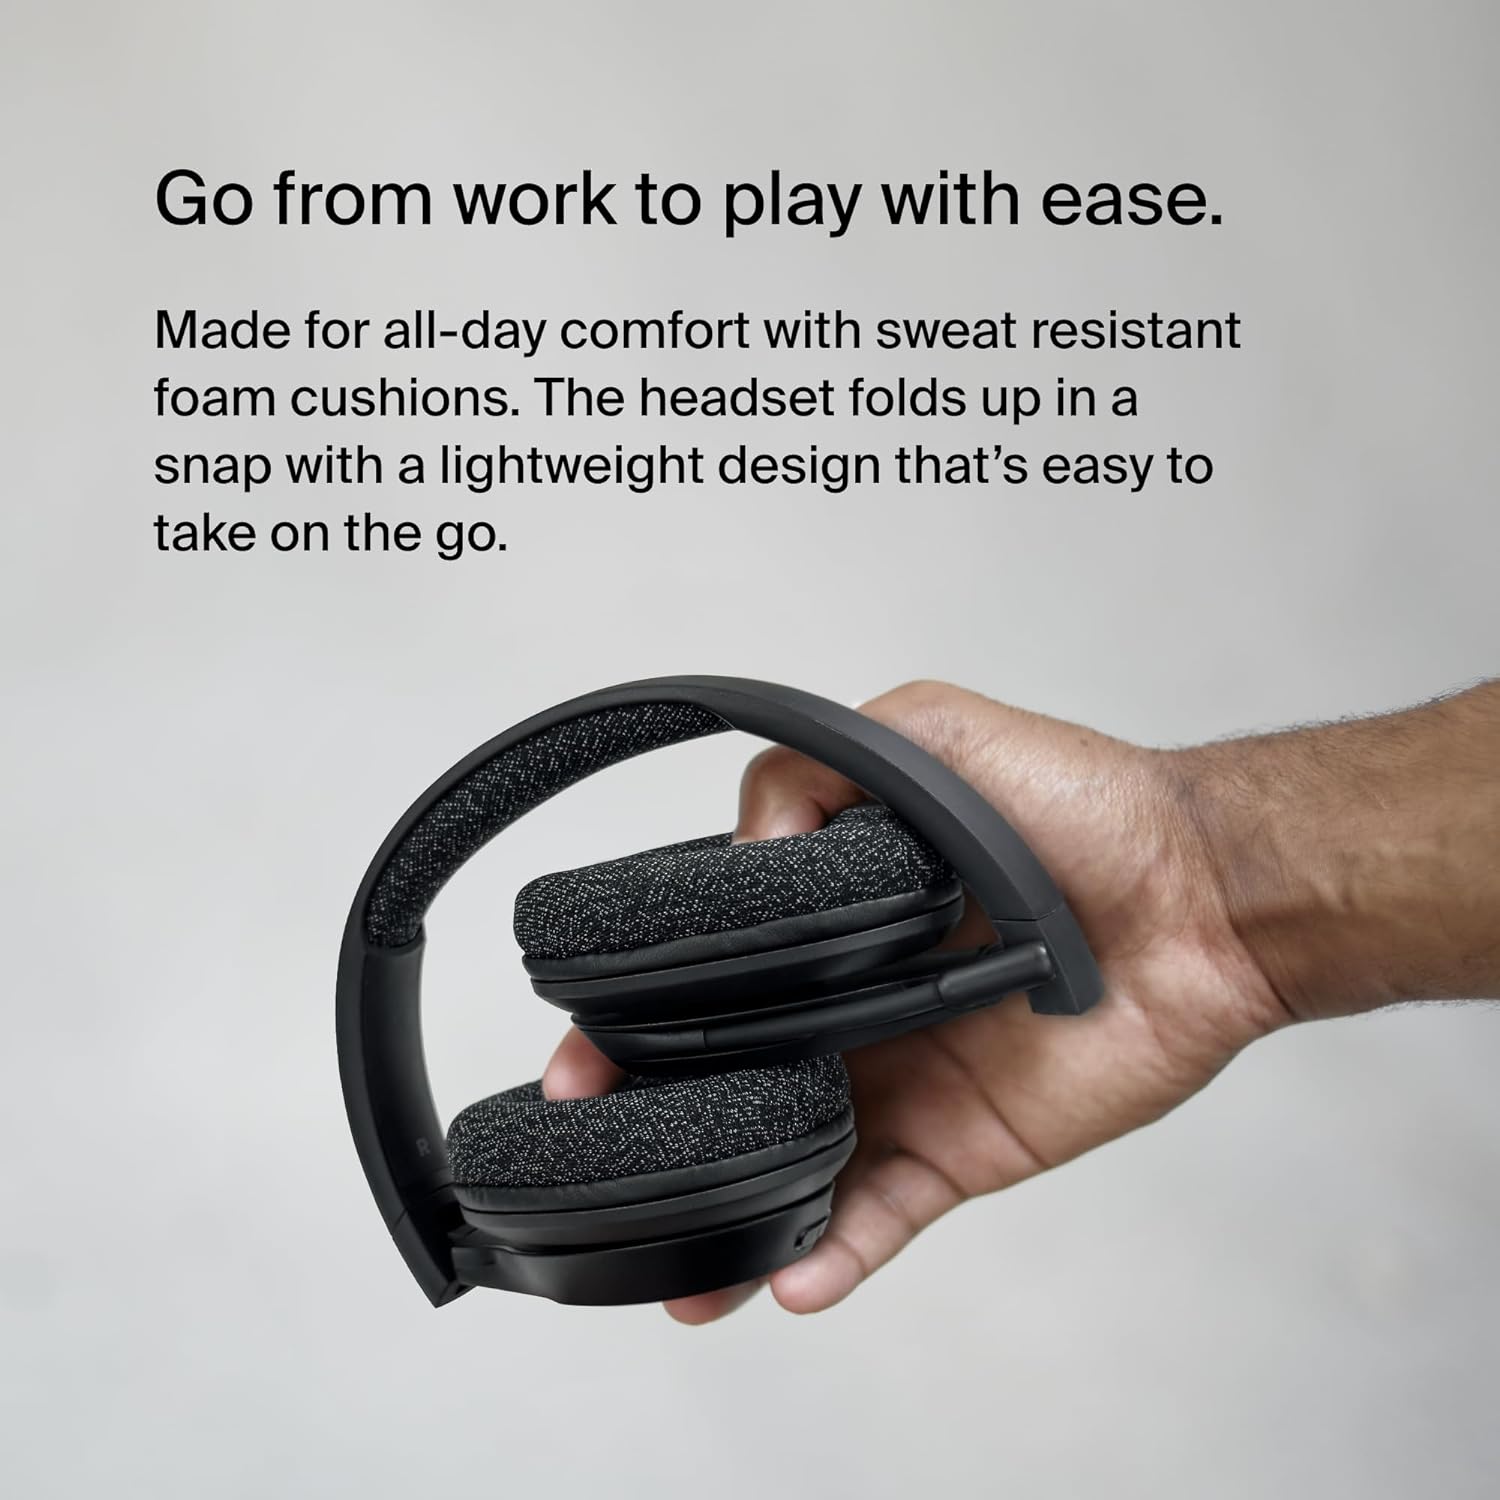 Belkin SoundForm Adapt Wireless Over-Ear Headset, Headphones for Work, Play, Gaming, & Travel with Built-In Boom Microphone - Compatible with iPhone, iPad, Galaxy, and More - Black